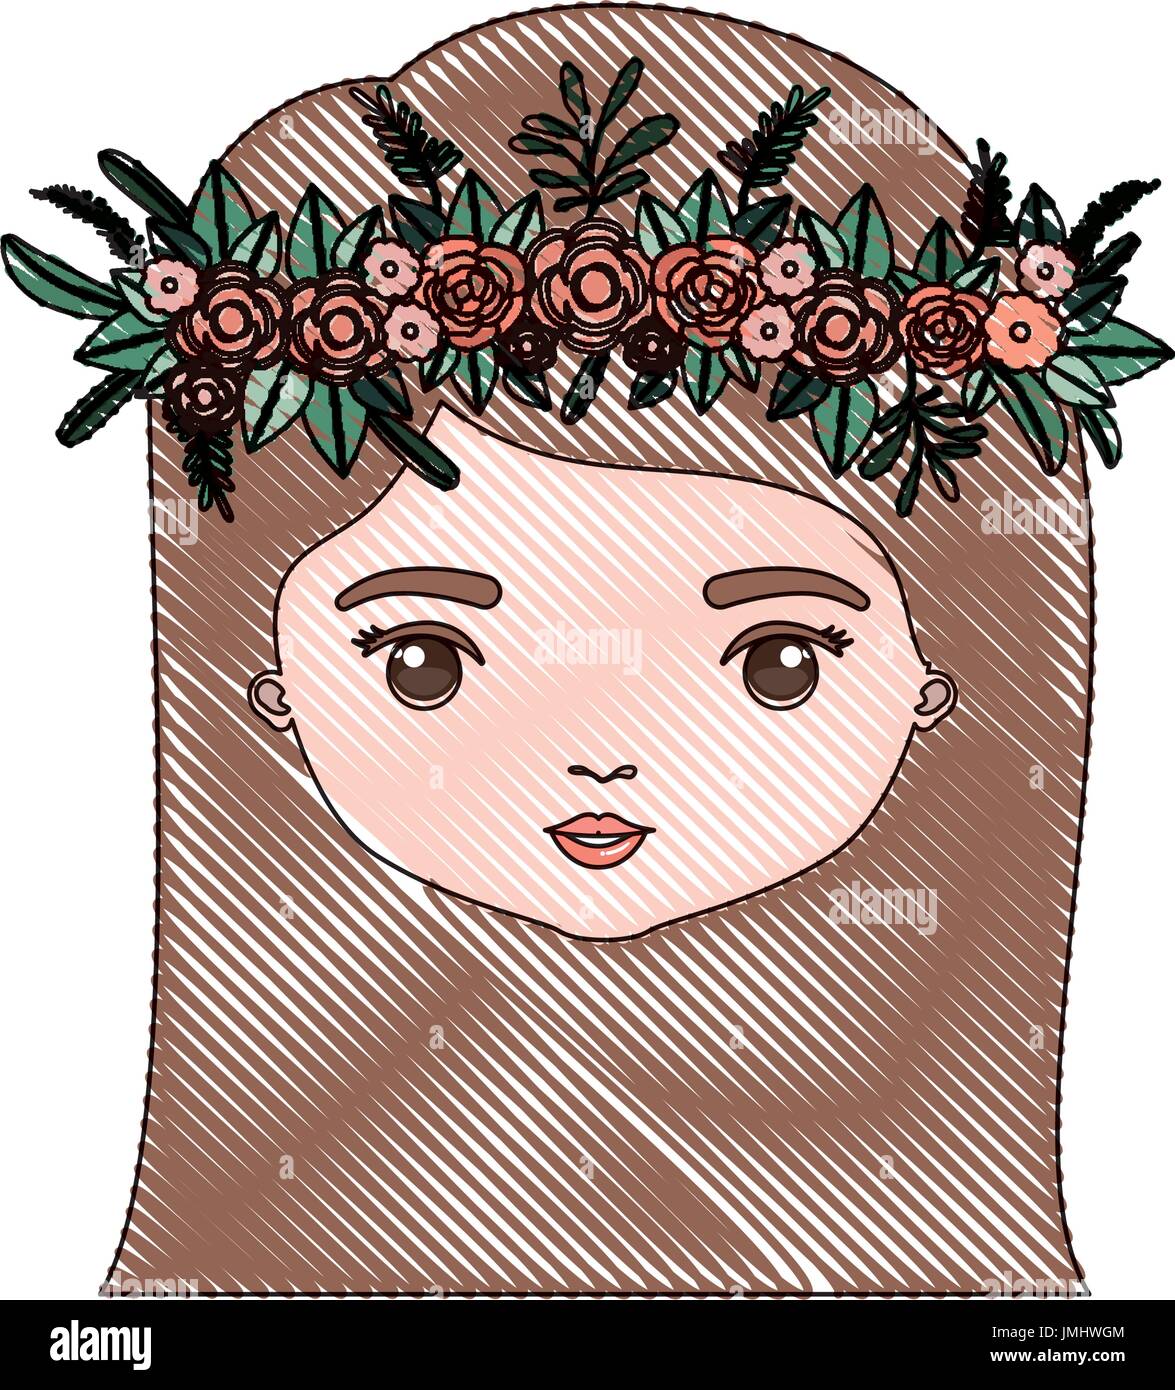 color crayon silhouette caricature closeup front view face woman with straigh medium hairstyle and crown decorate with flowers Stock Vector